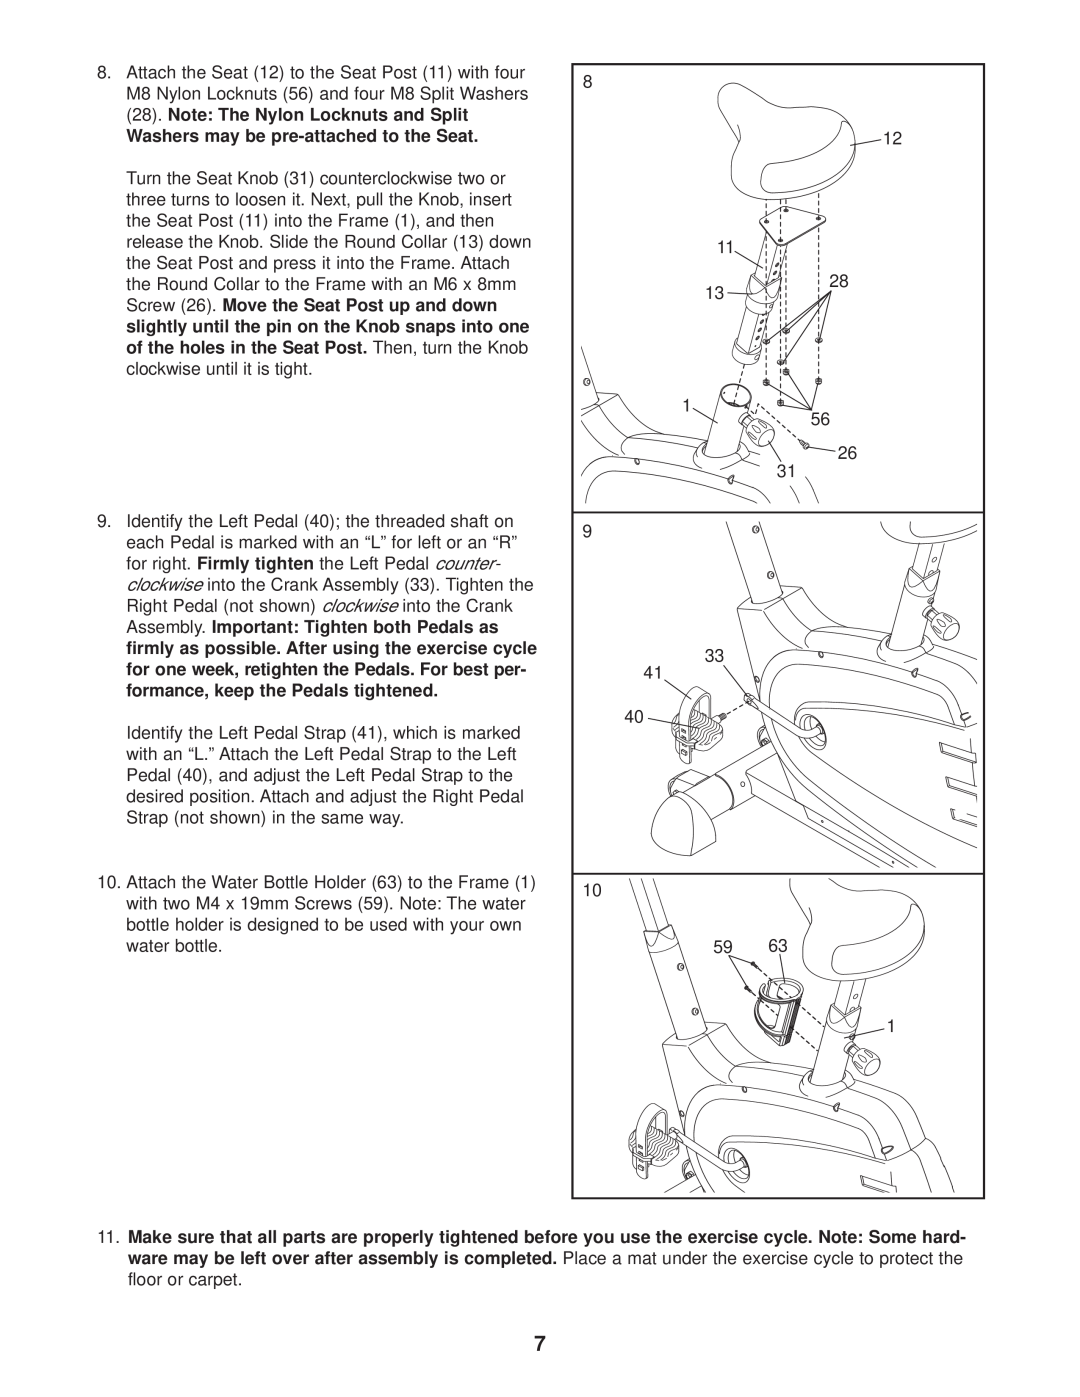 ProForm PFEX4986.0 user manual Note The Nylon Locknuts and Split, Washers may be pre-attached to the Seat 